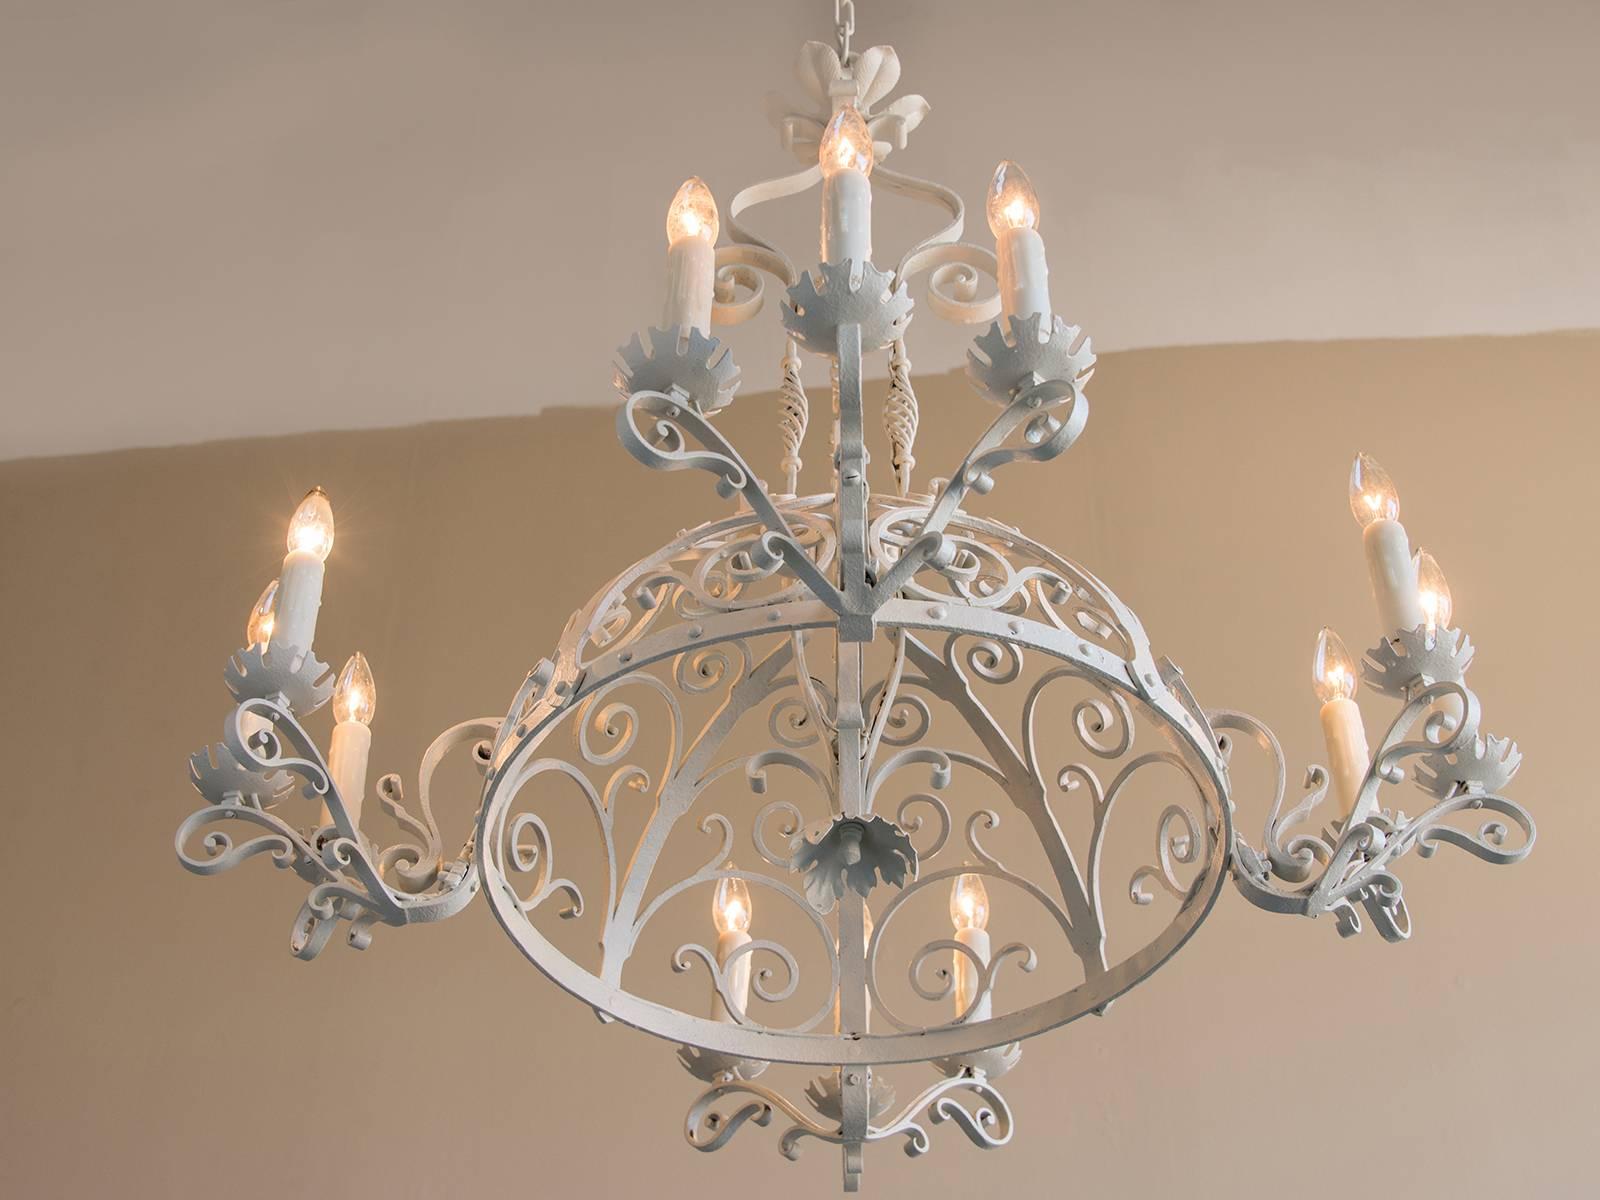 Receive our new selections direct from 1stdibs by email each week. Please click Follow Dealer below and see them first!

The elegant iron work on this chandelier circa 1910 showcases a variety of motifs that give it an attractive appeal. This